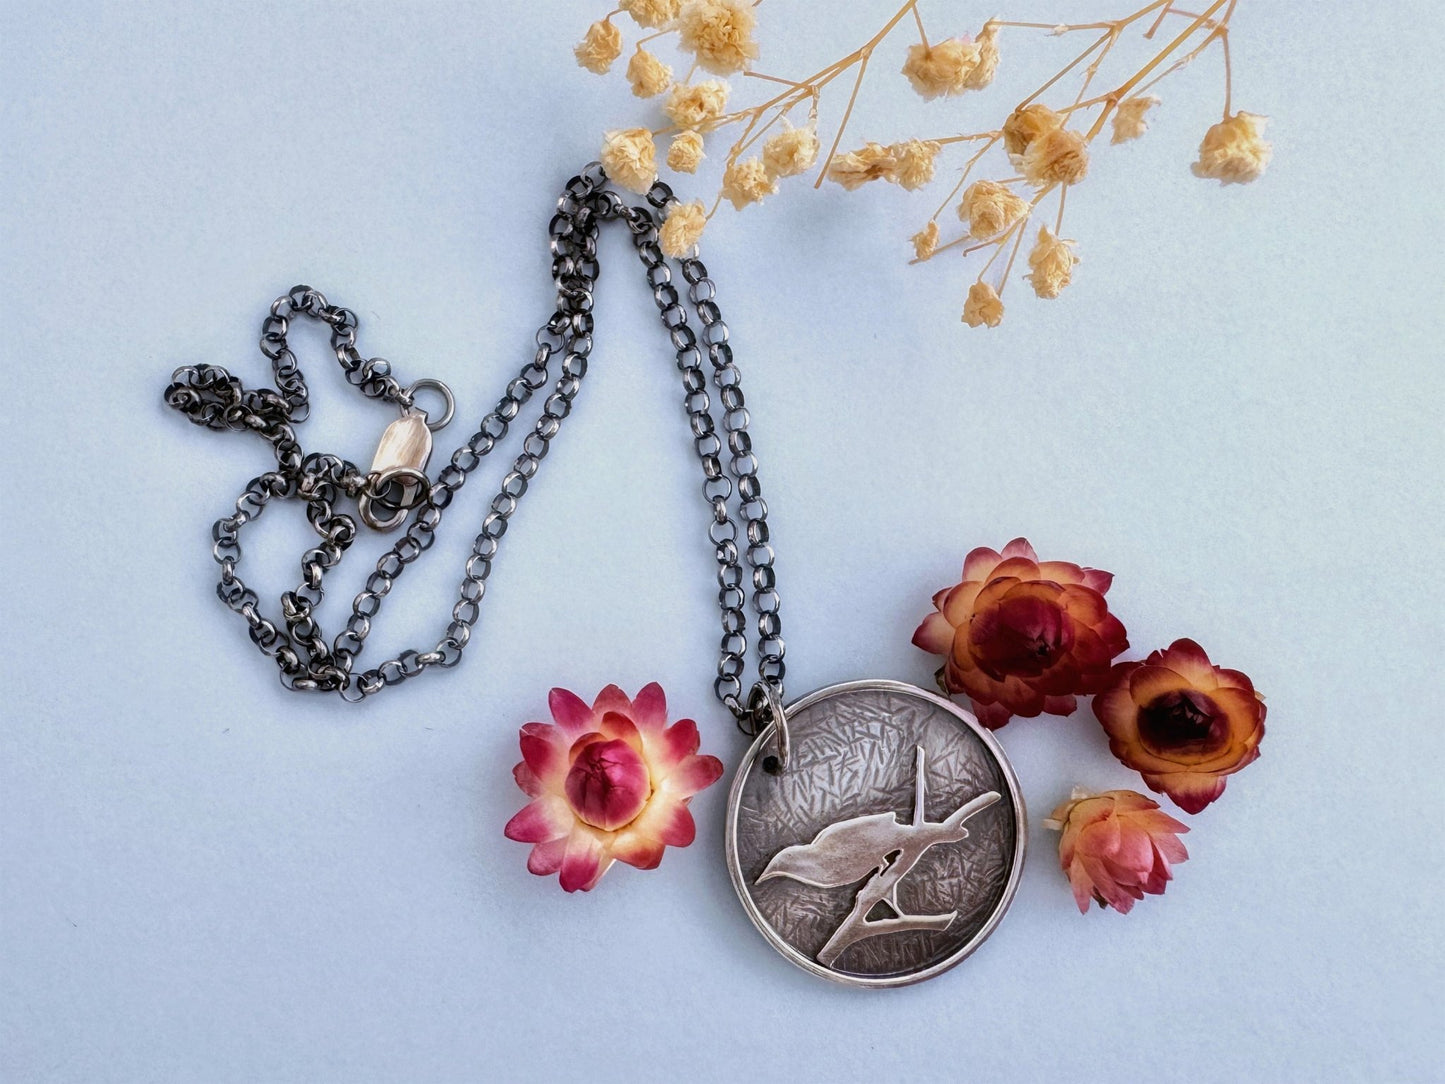 A round sterling silver pendant hangs from a rolo style chain. The pendant features a raised raven or crow sitting on the branch of a tree. The background has been hammered to represent leaves. The necklace is lying on a pale blue background, surrounded by cream and dark pink dried flowers.